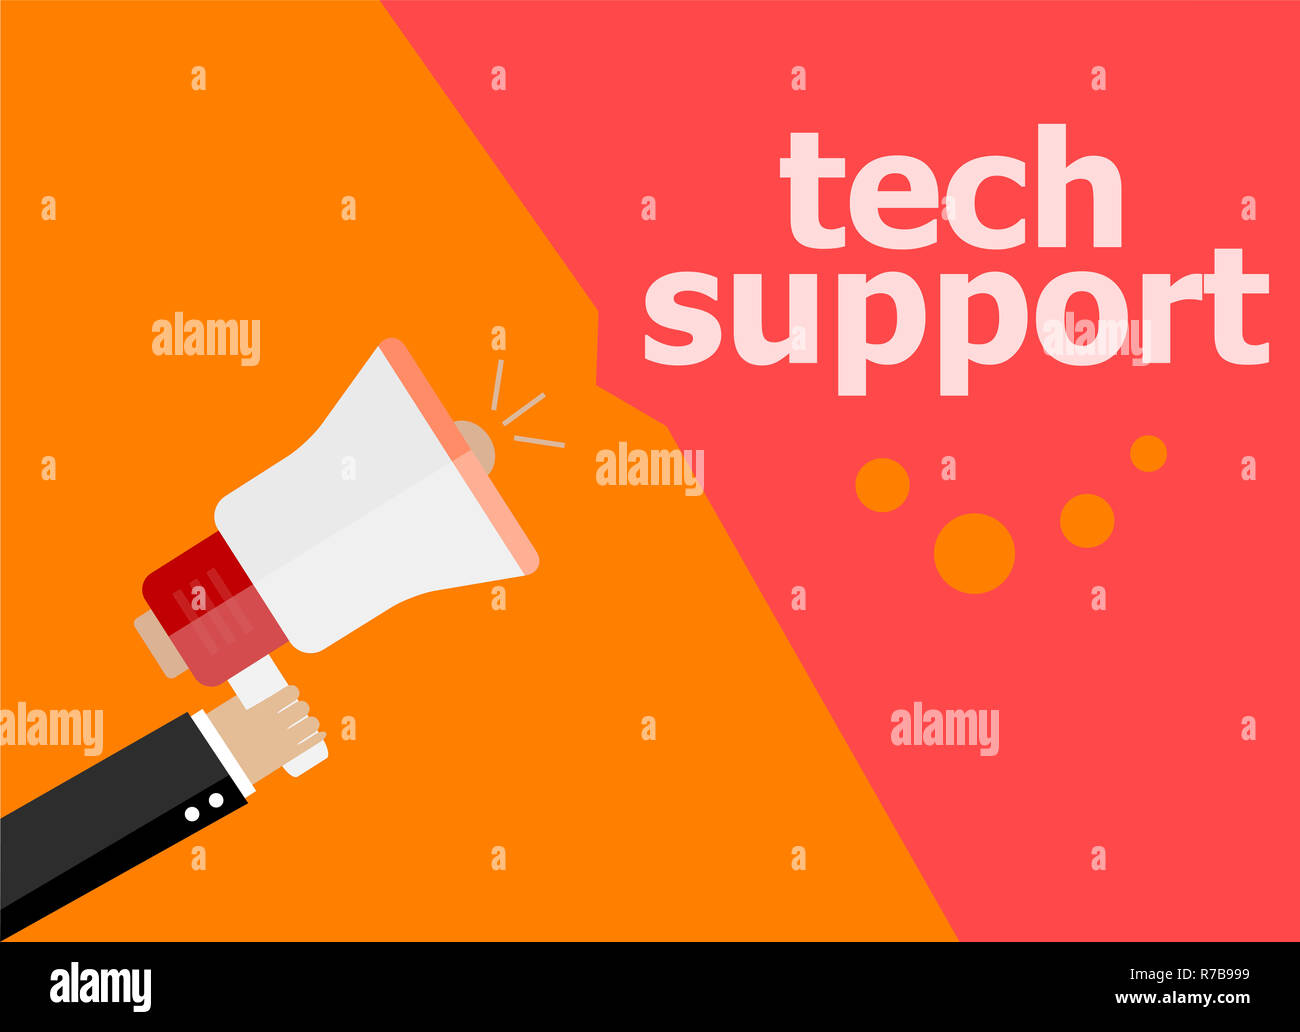 tech support. Hand holding a megaphone. flat style Stock Photo